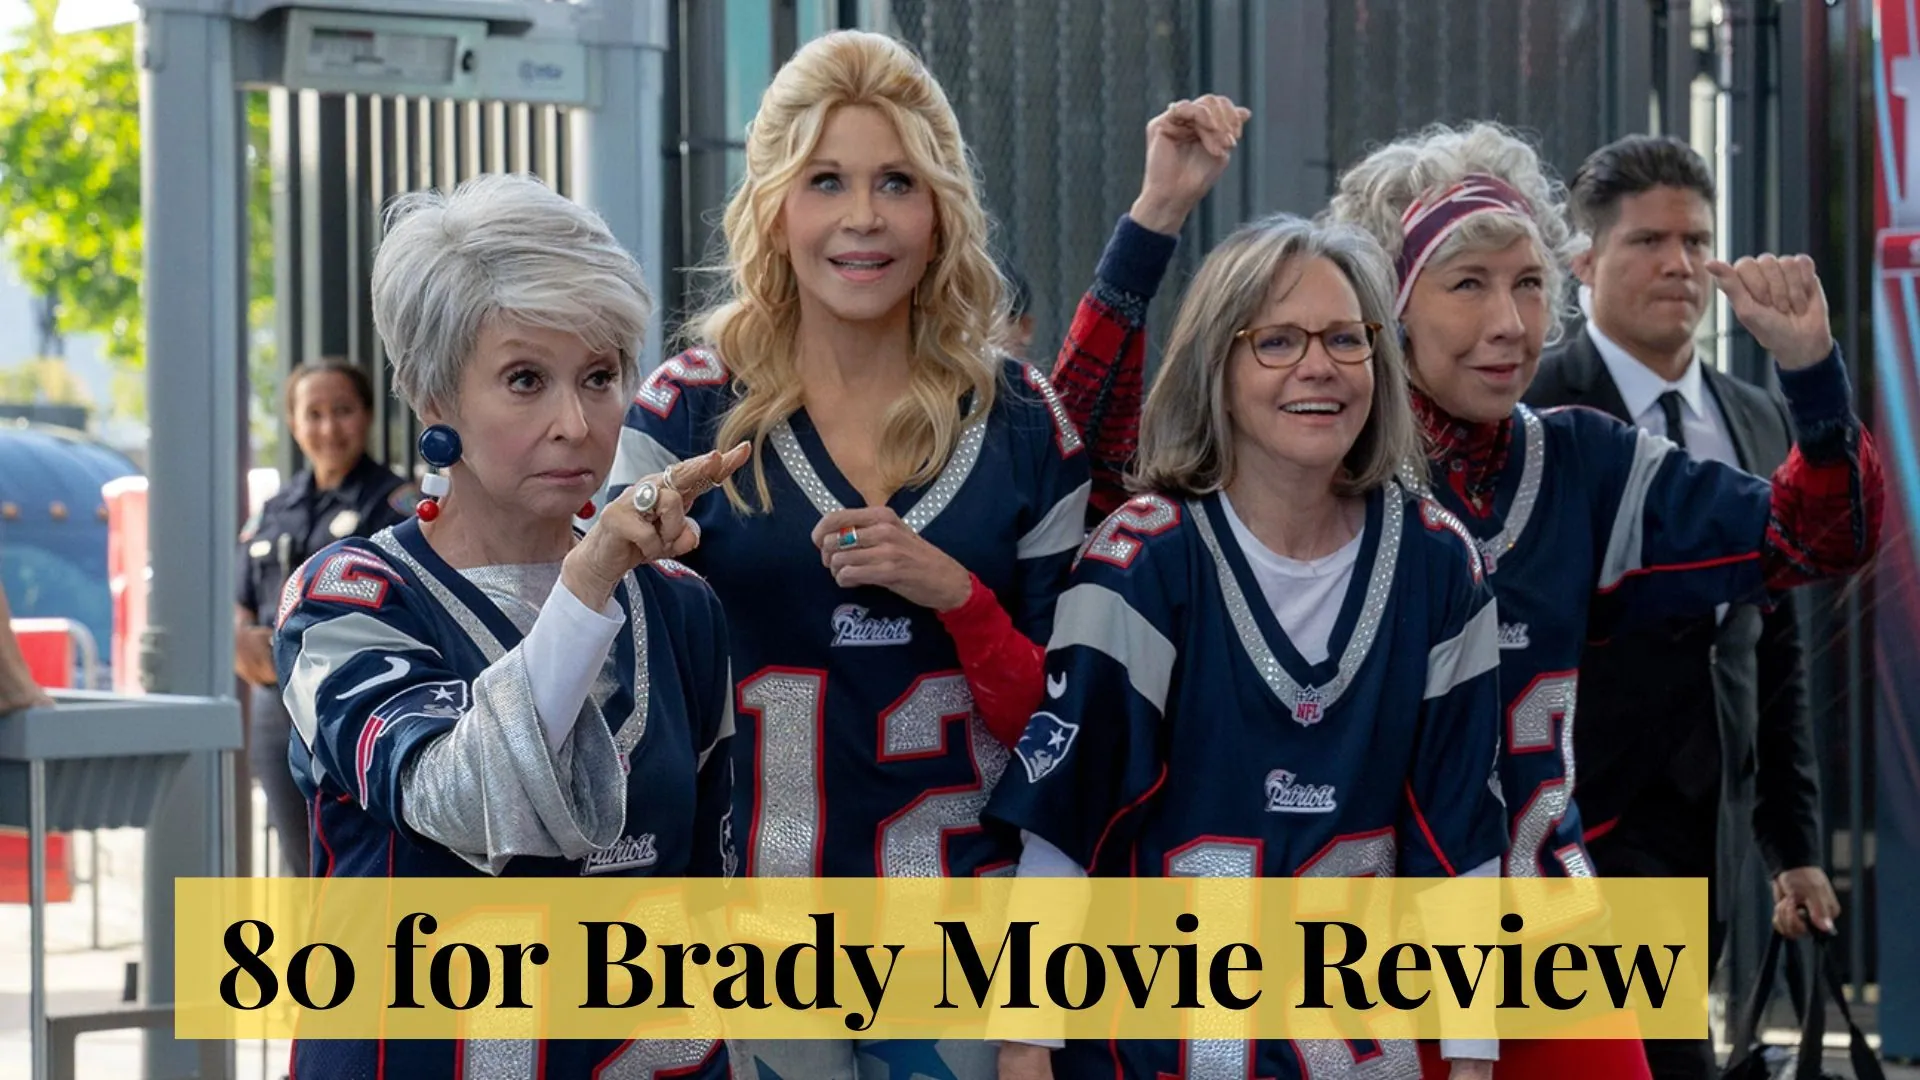 80 for Brady Movie Review (Image credit: youtube)